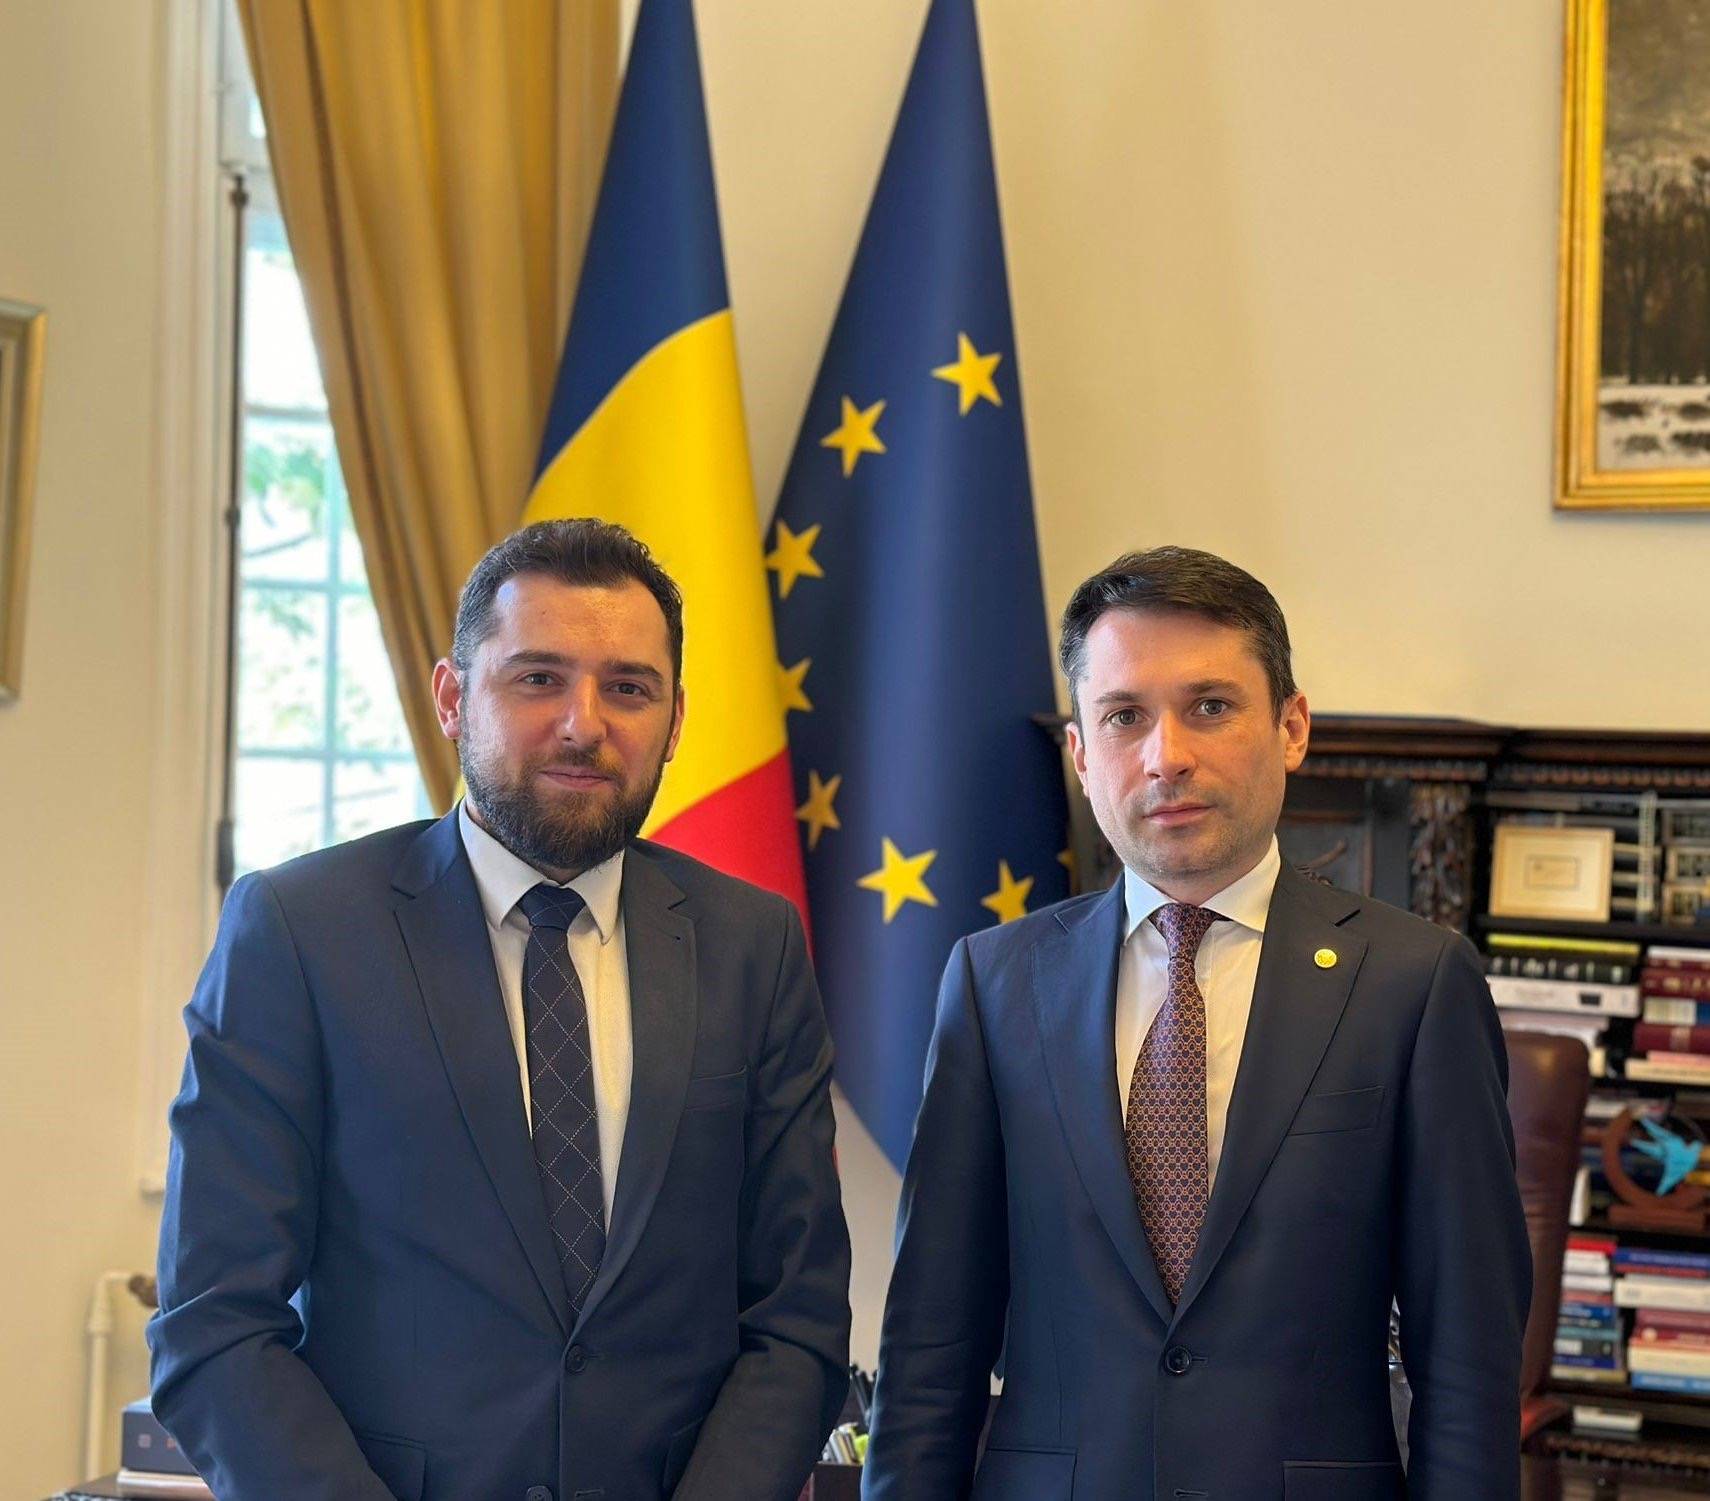 Ambassador Tigran Galstyan had a meeting with the Secretary of State for Religious Affairs within the Government of Romania, Ciprian-Vasile Olinici